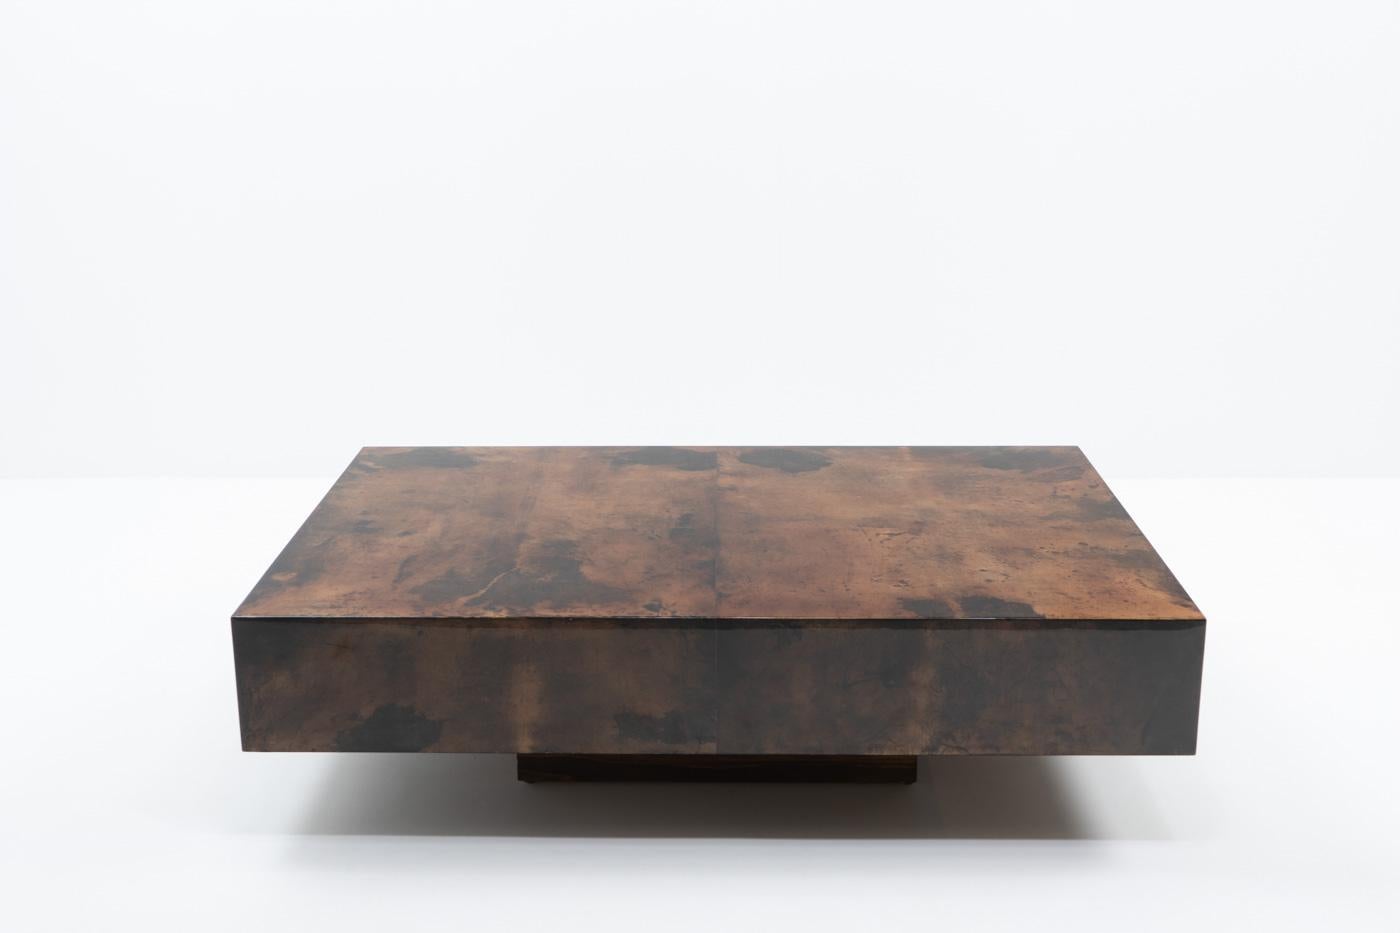 Coffee table designed by Aldo Tura during the 1970s; the table has been covered in red-brown dyed goatskin and finished with a high gloss lacquer. A beautiful statement piece, guaranteed to ignite conversation.

The use of goatskin in furniture is a